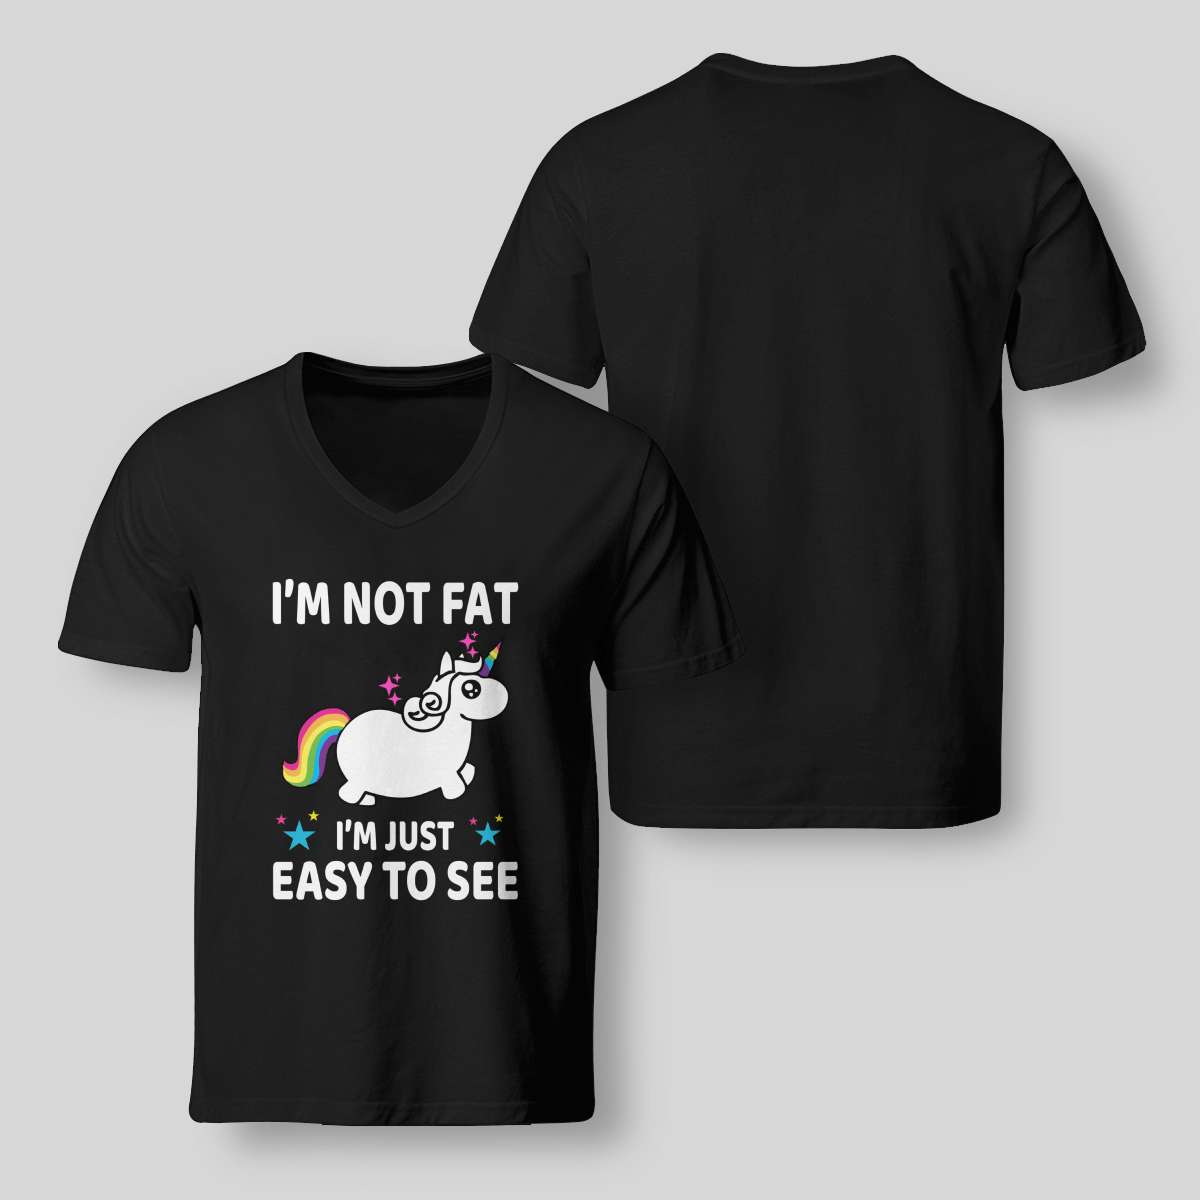 I'm not fat I'm just easy to see - Fat unicorn